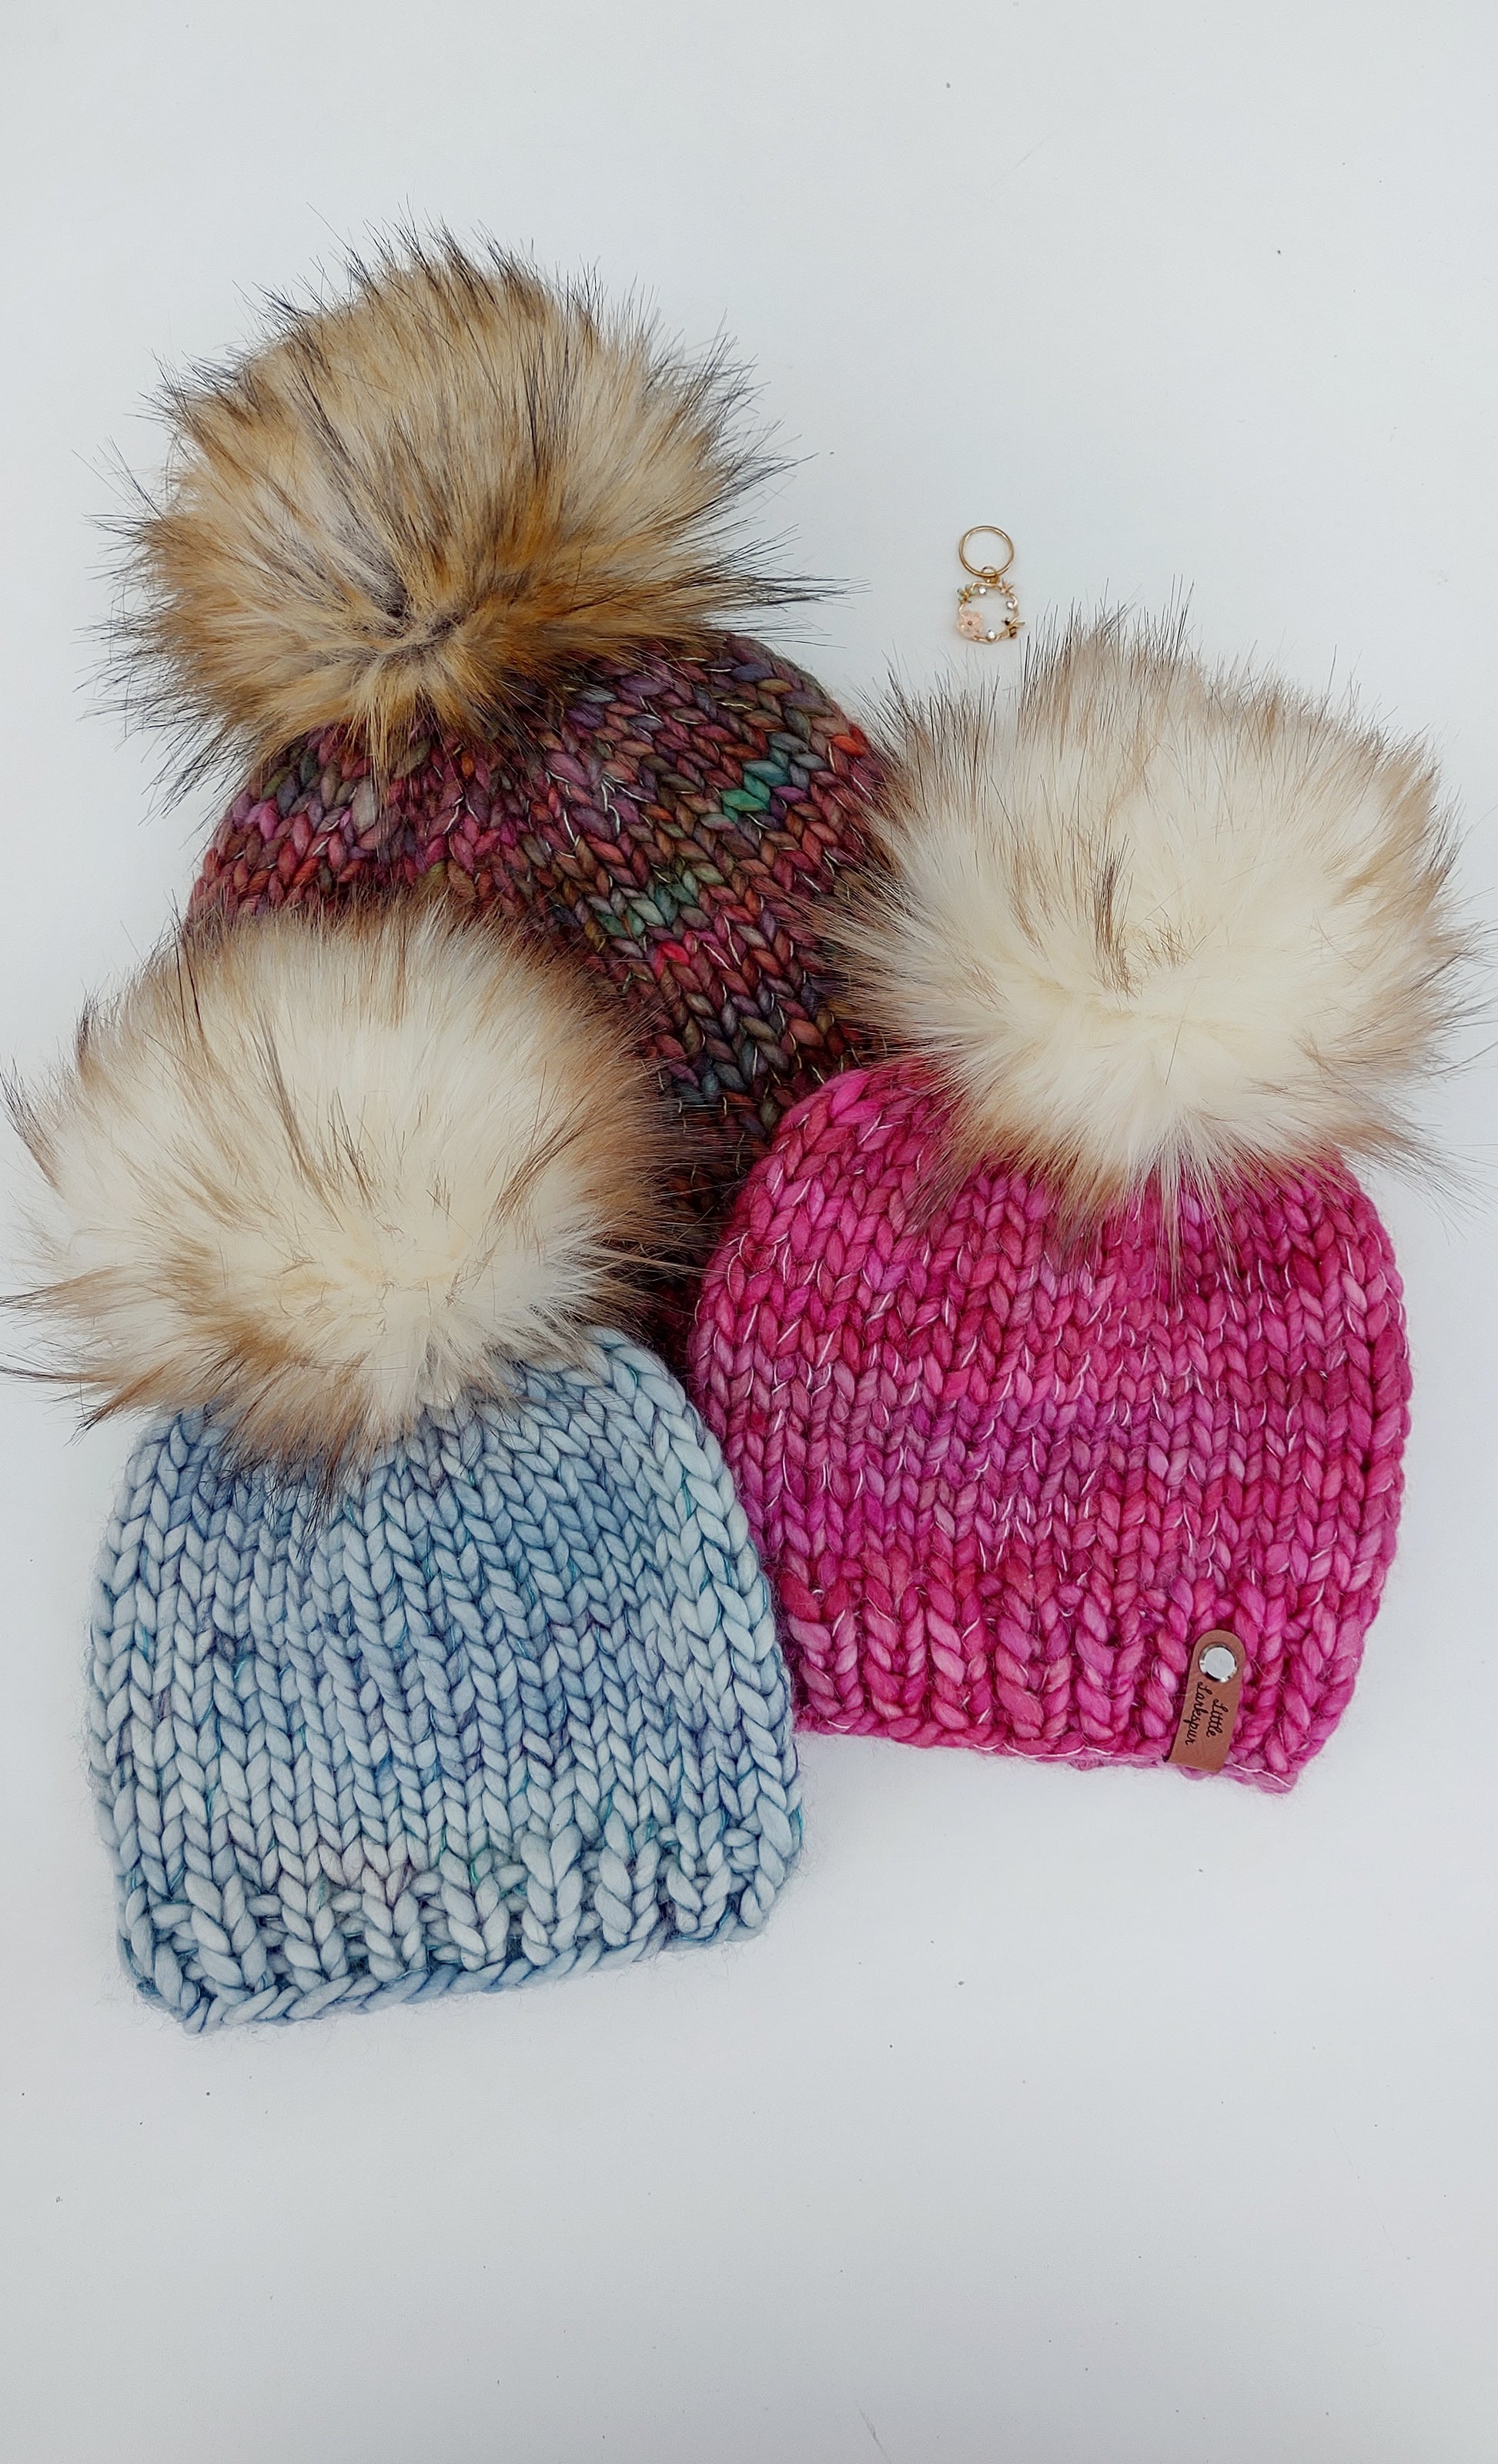 Three colorful hats with big faux fur pom poms